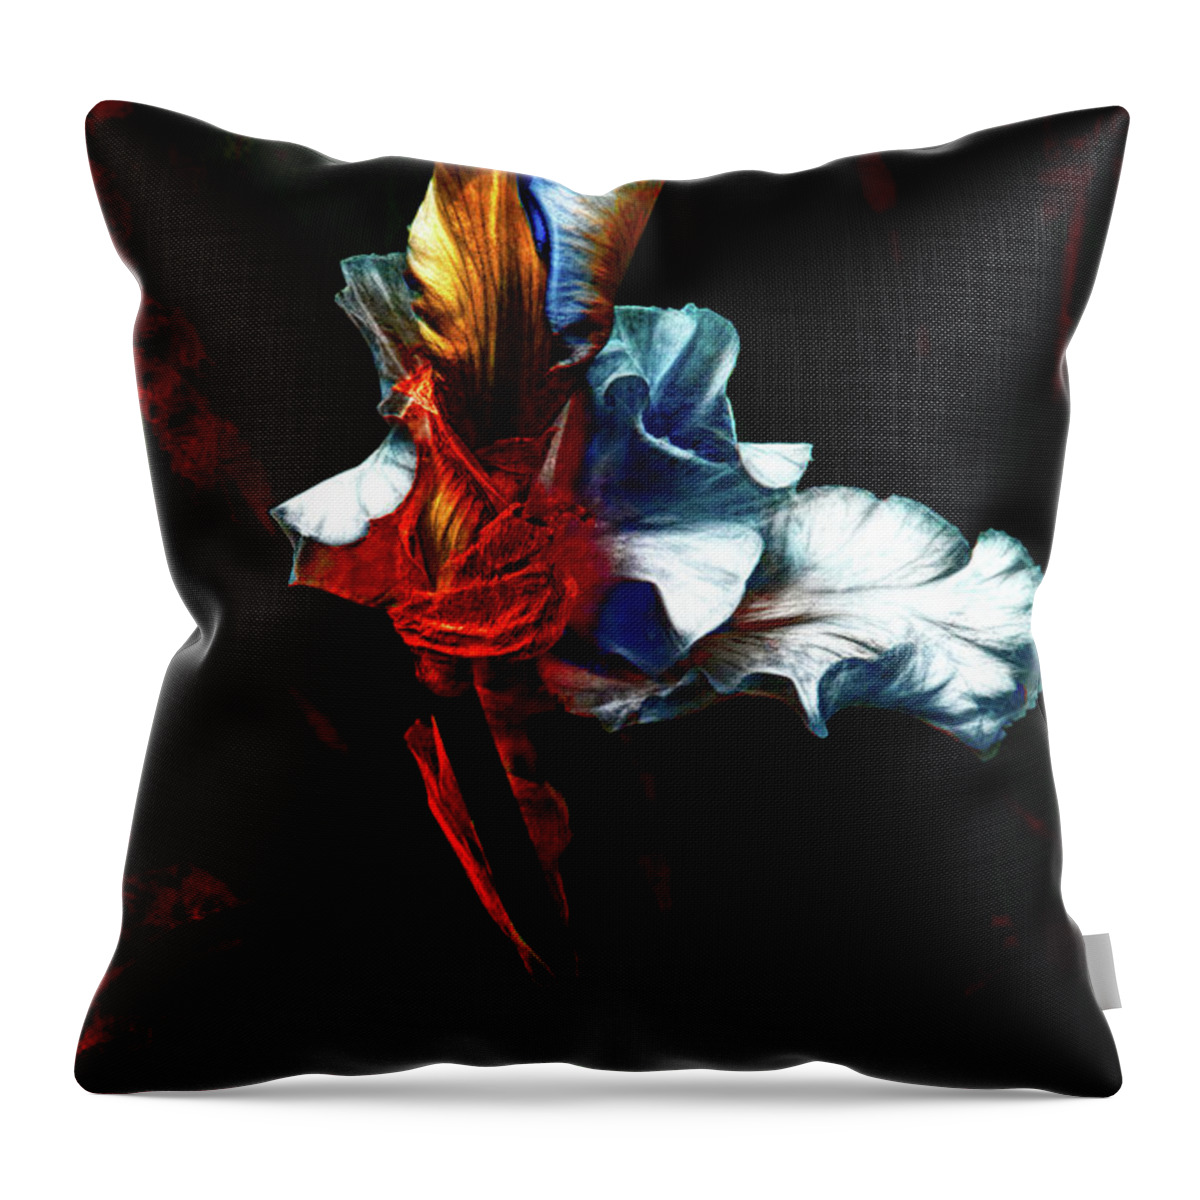 Waterloo Throw Pillow featuring the photograph Waterloo by Cynthia Dickinson